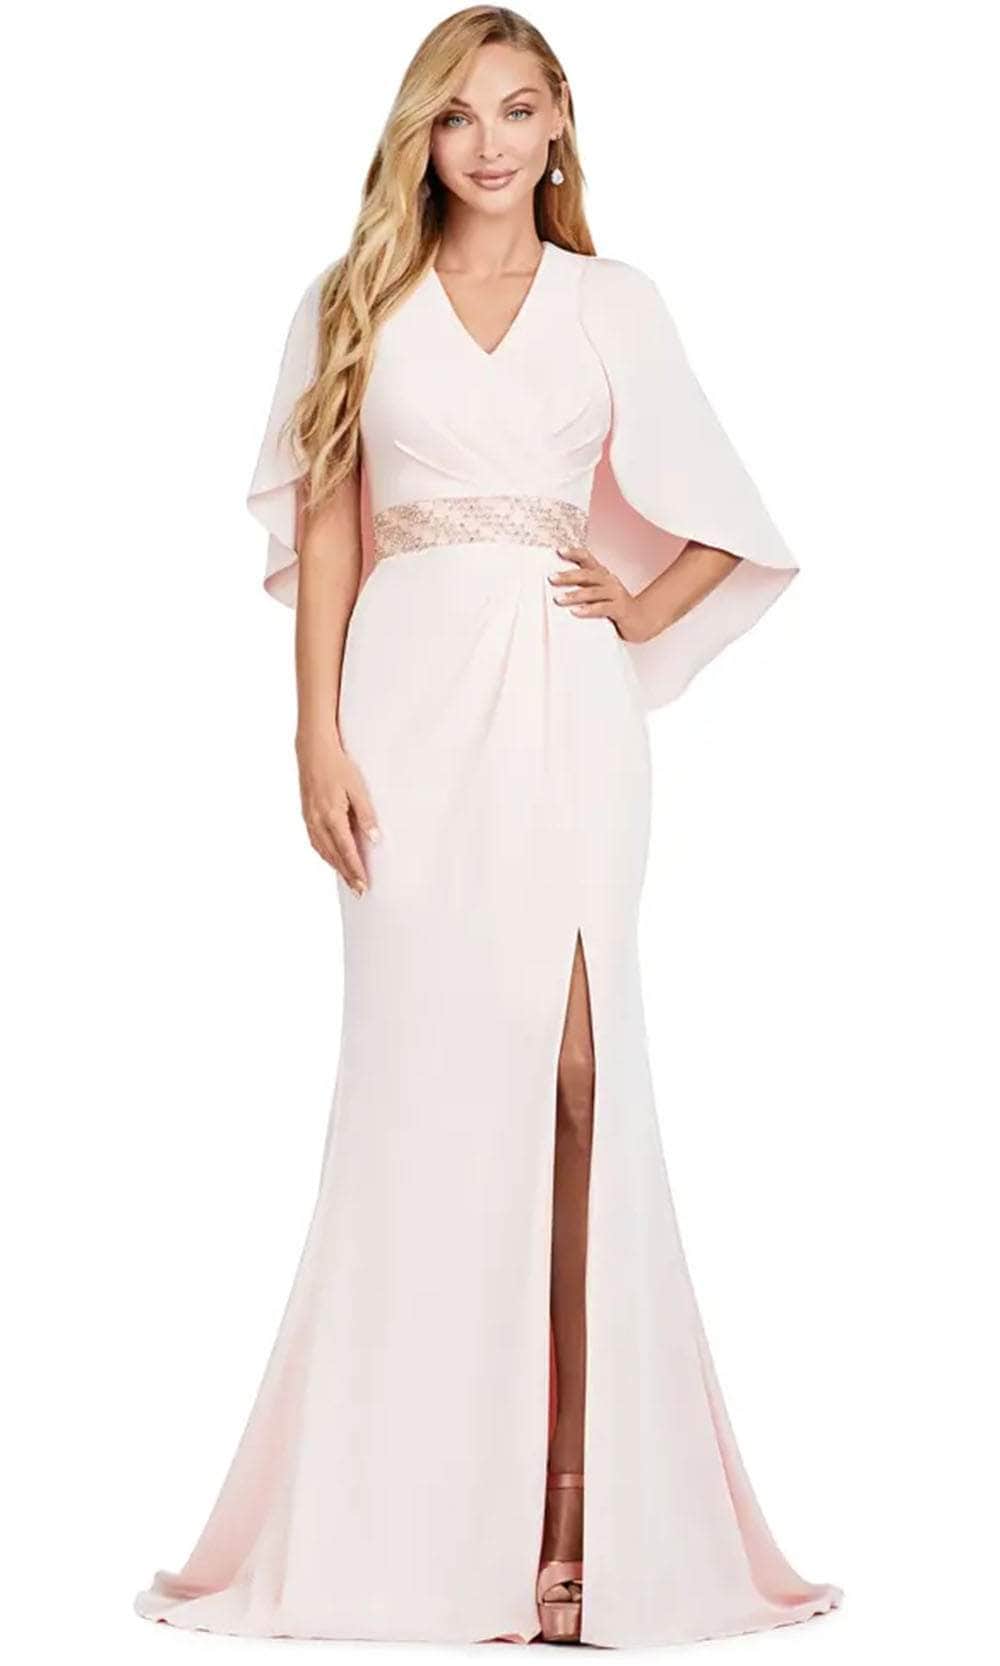 Image of Ashley Lauren 11416 - V Neck Gown with Cape